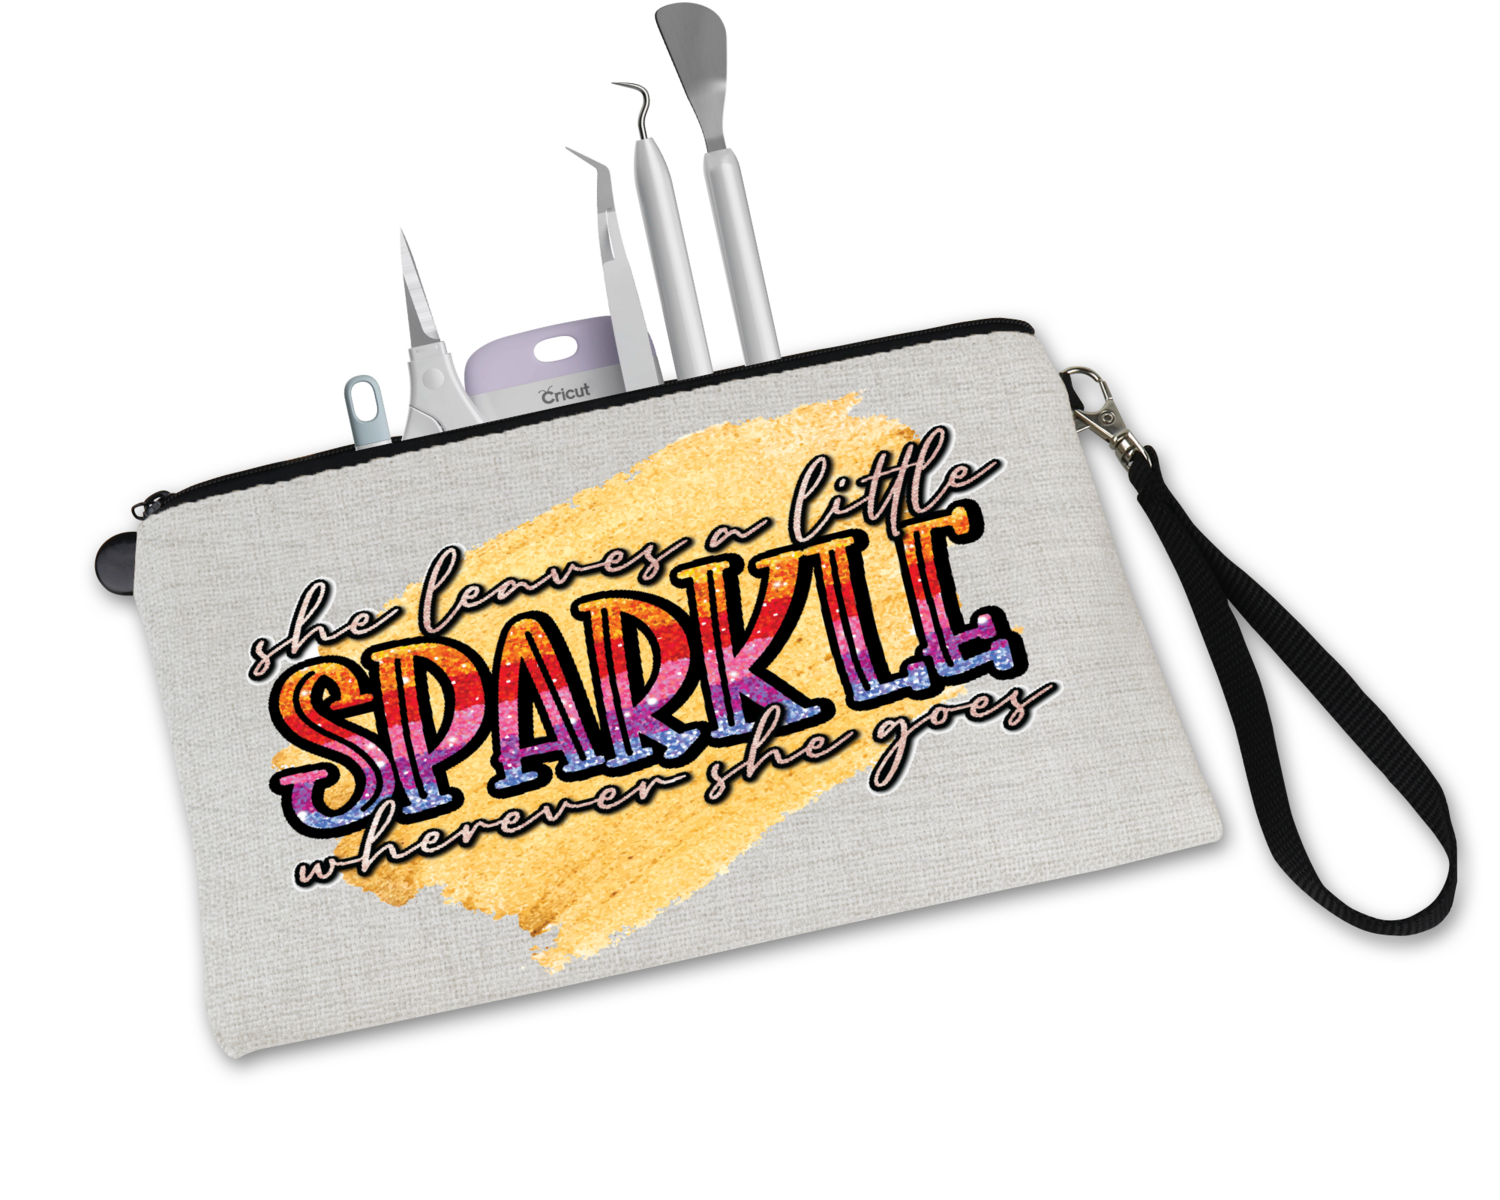 Crafting Tool Bag: SHE LEAVES A LITTLE SPARKLE WHEREVER SHE GOES